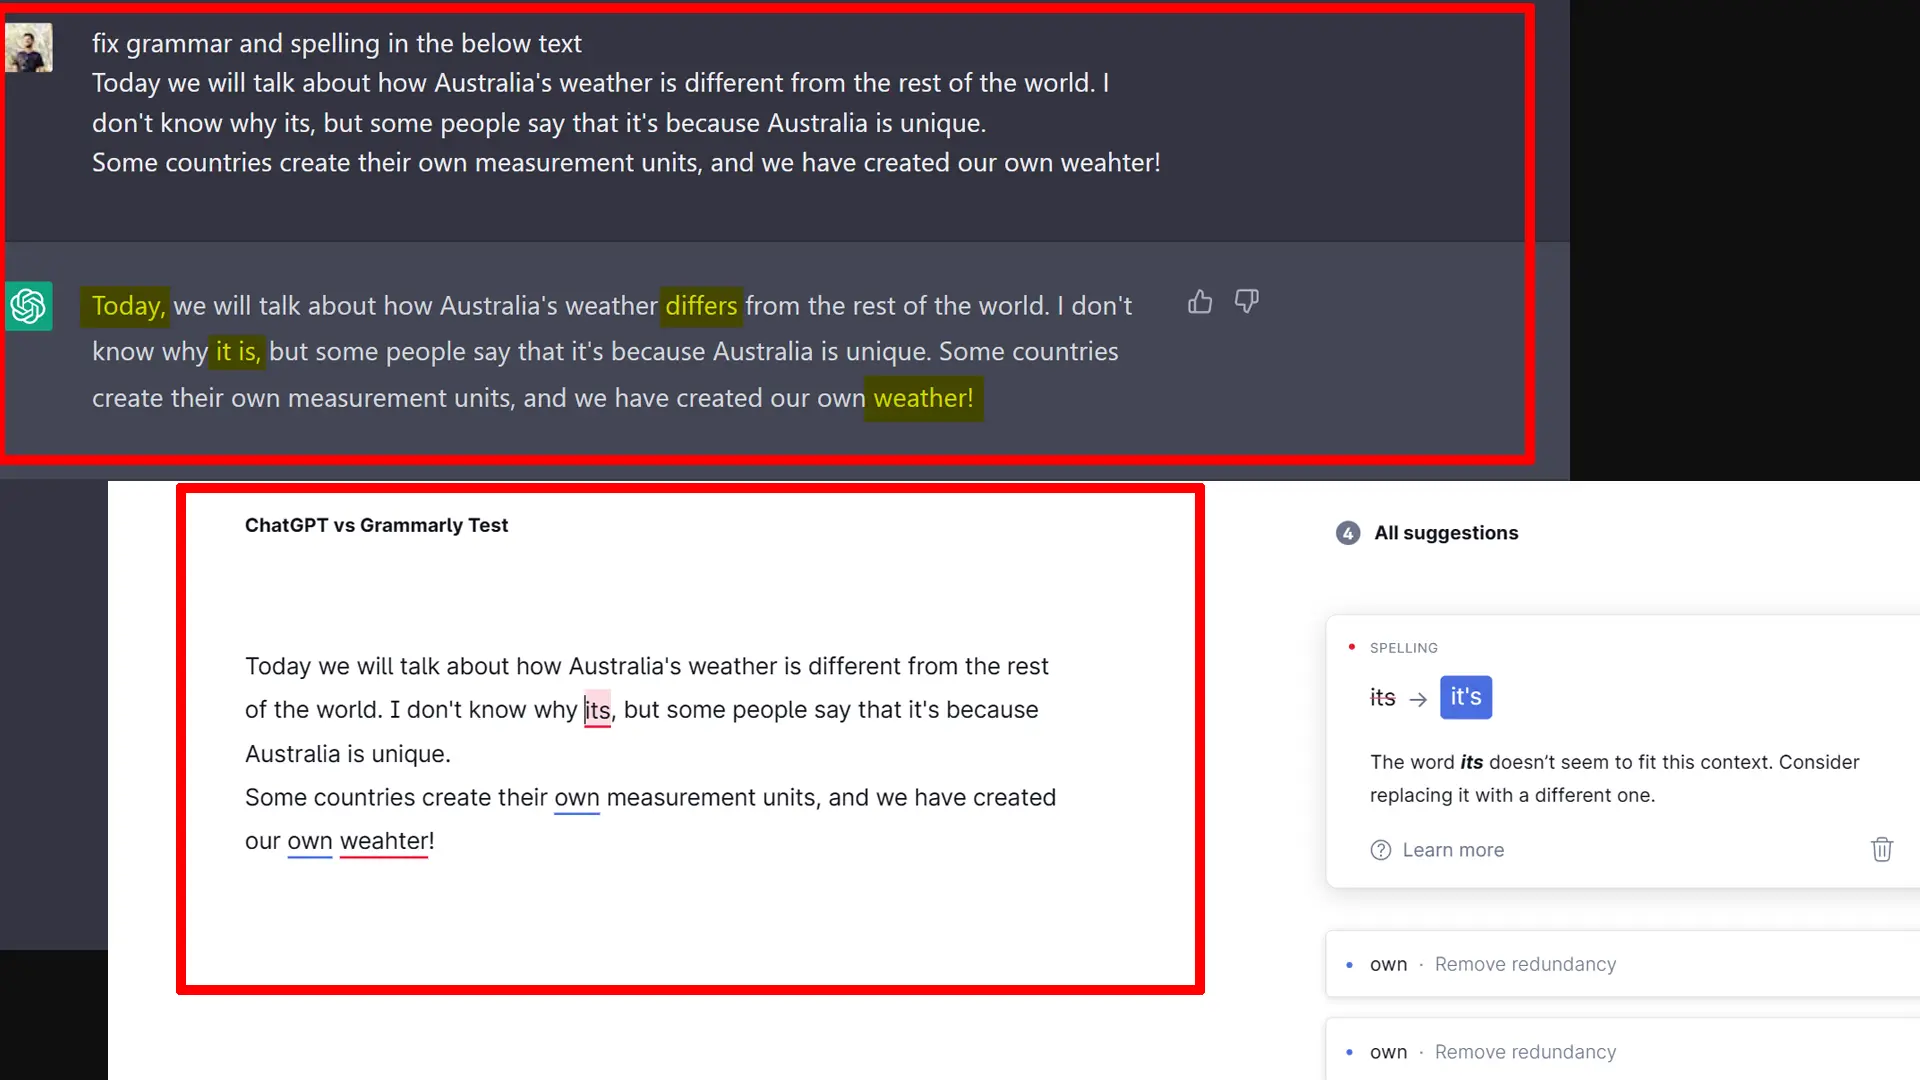 ChatGPT and Grammarly Fixing Grammar